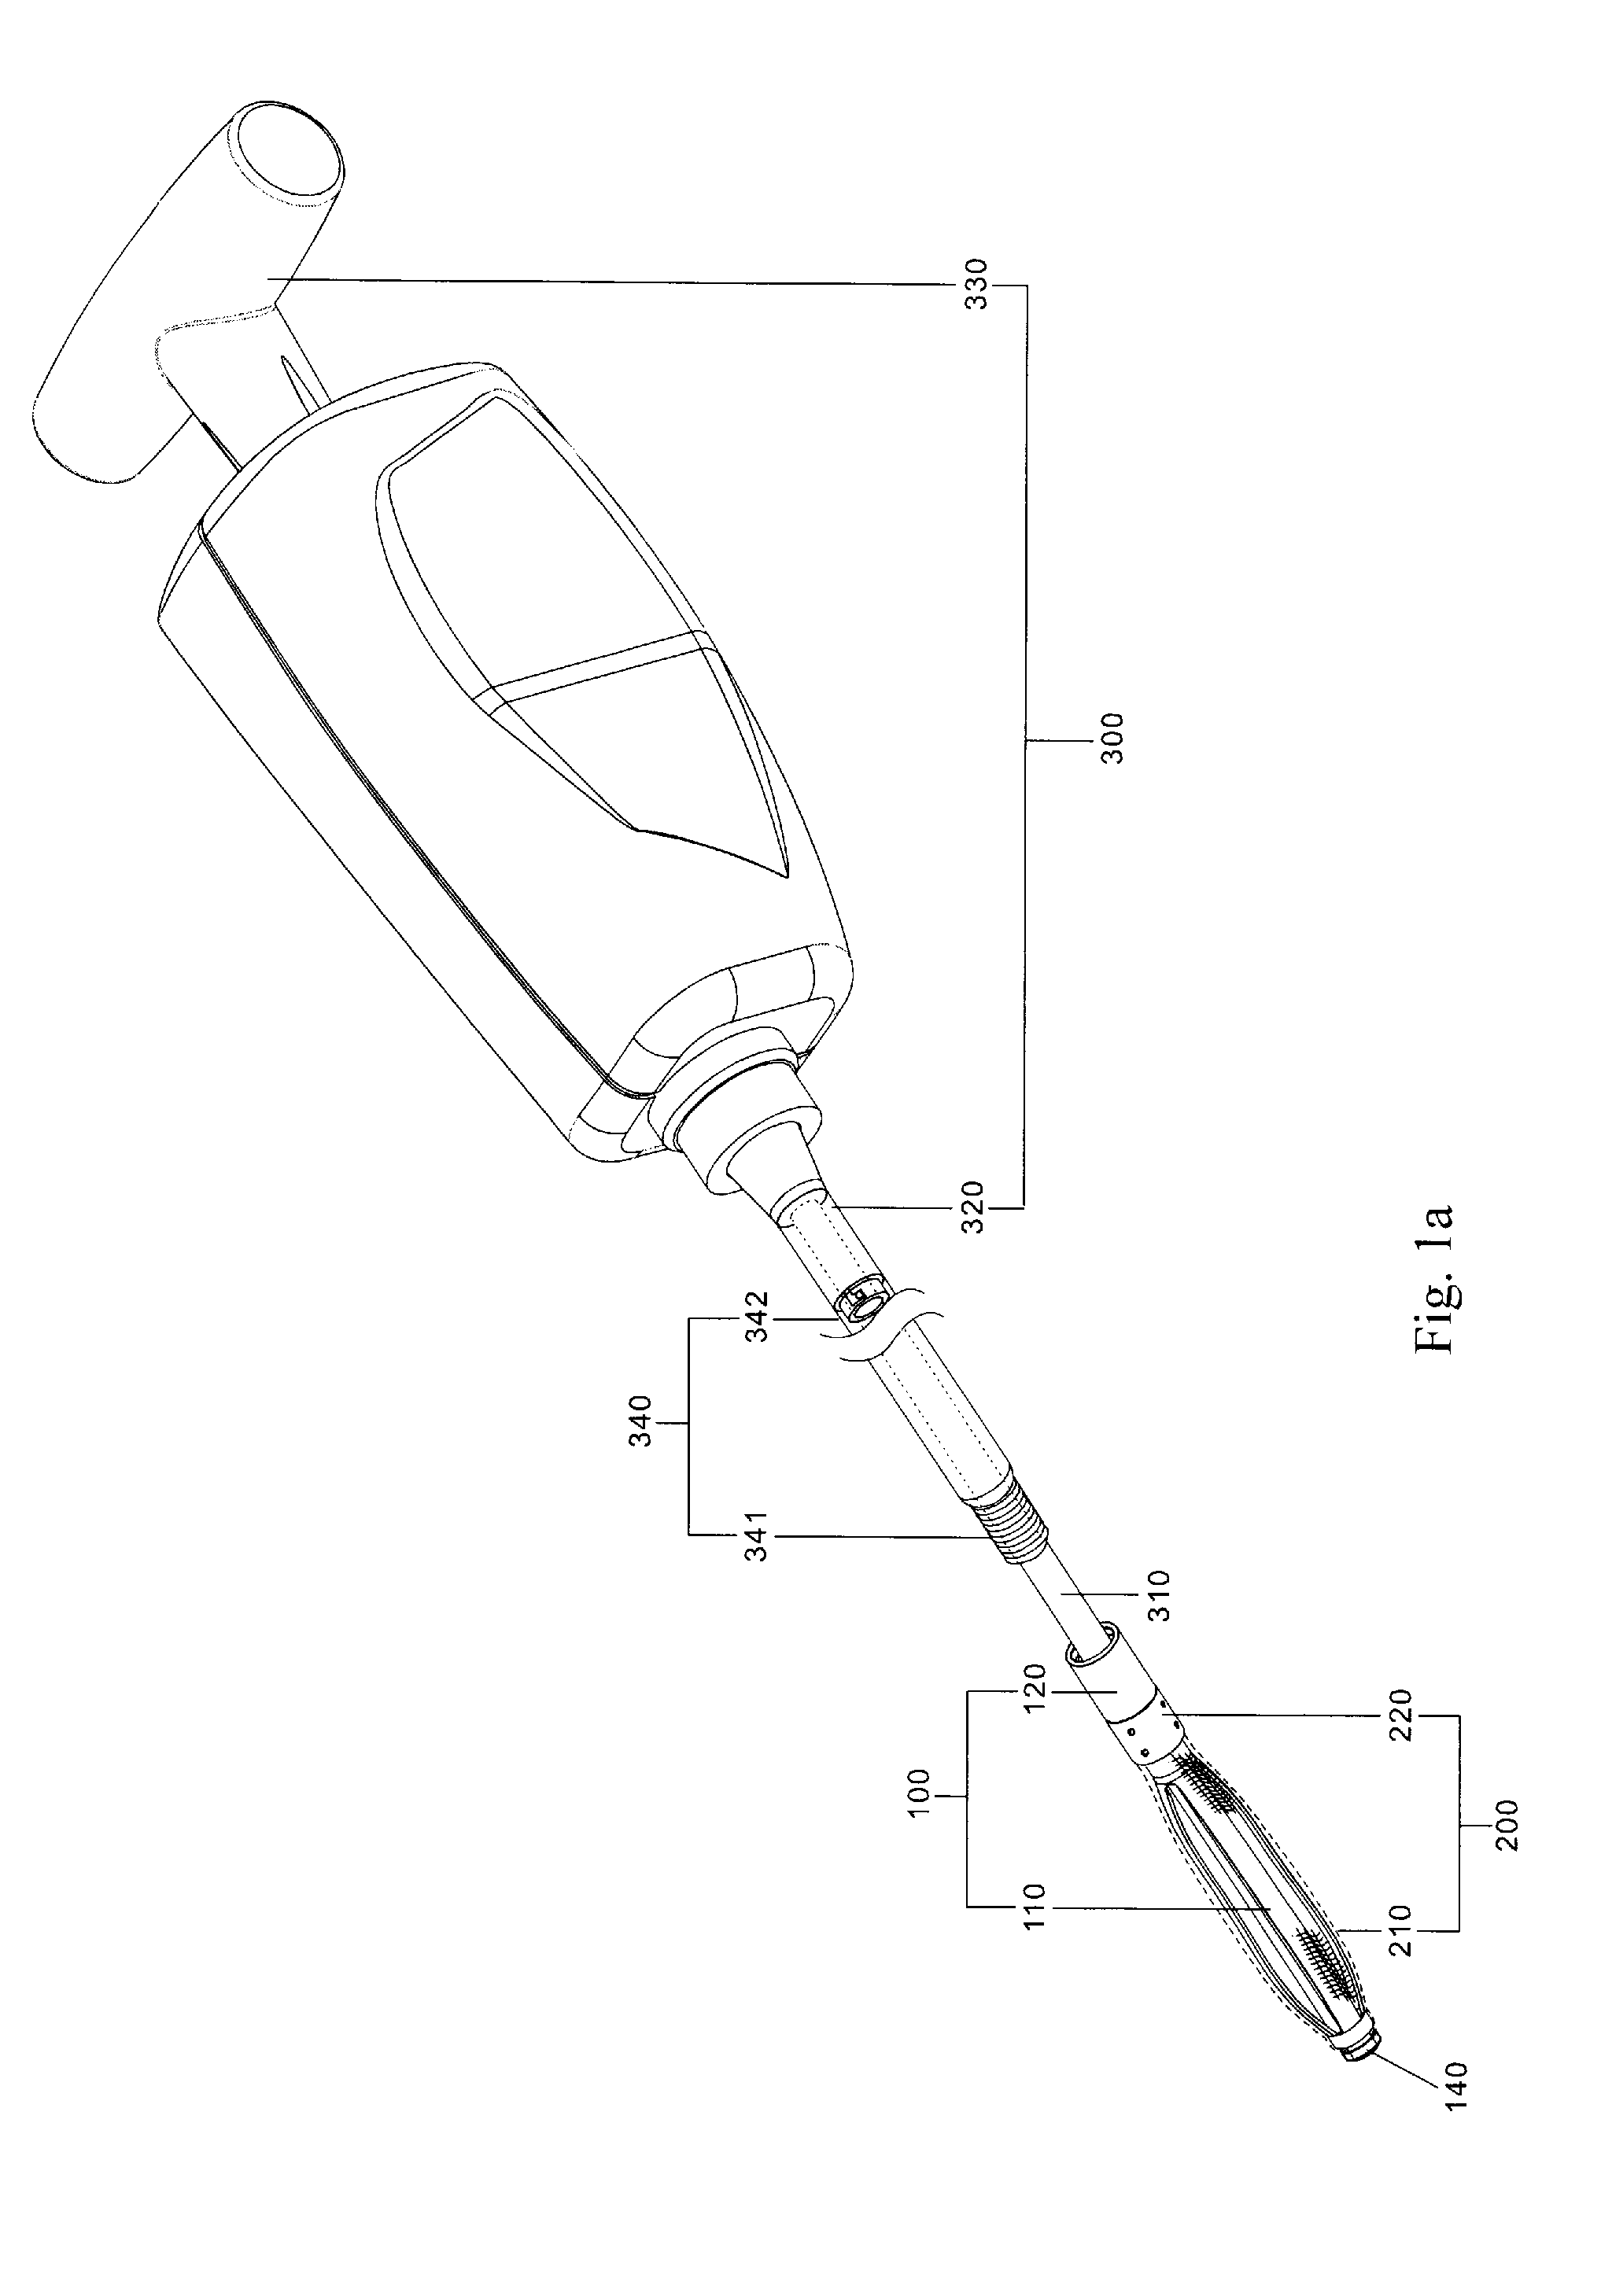 Device for bone fixation